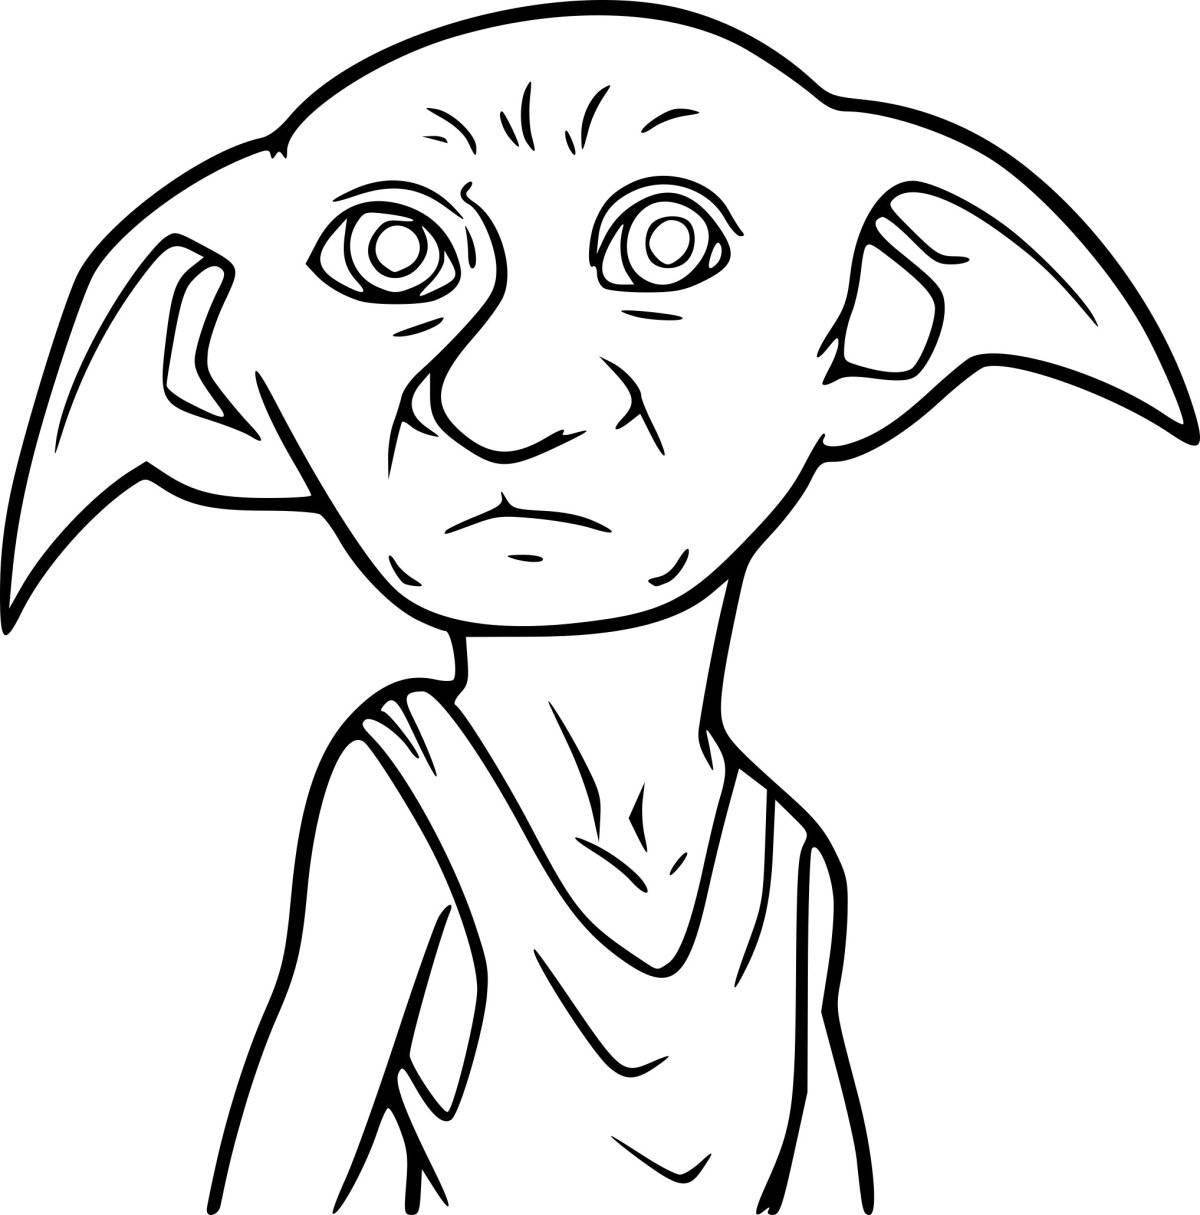 Harry potter dobby humorous coloring book